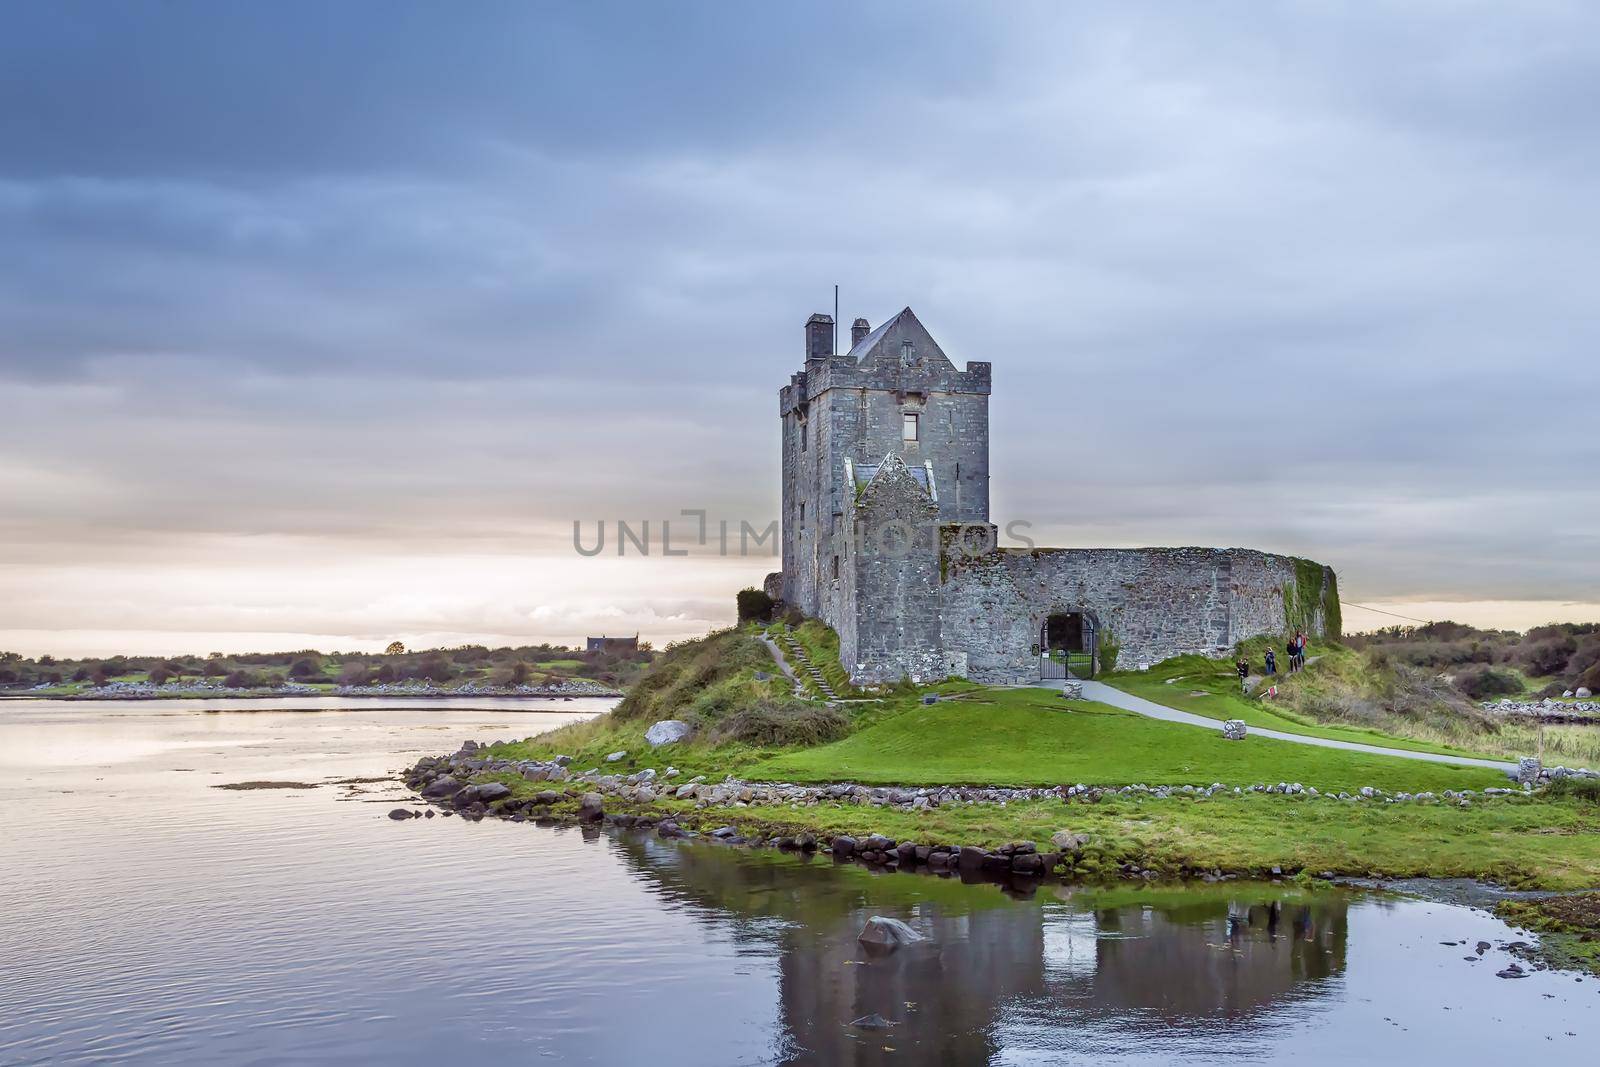 Dunguaire Castle is a 16th-century tower house on the southeastern shore of Galway Bay in County Galway, Ireland